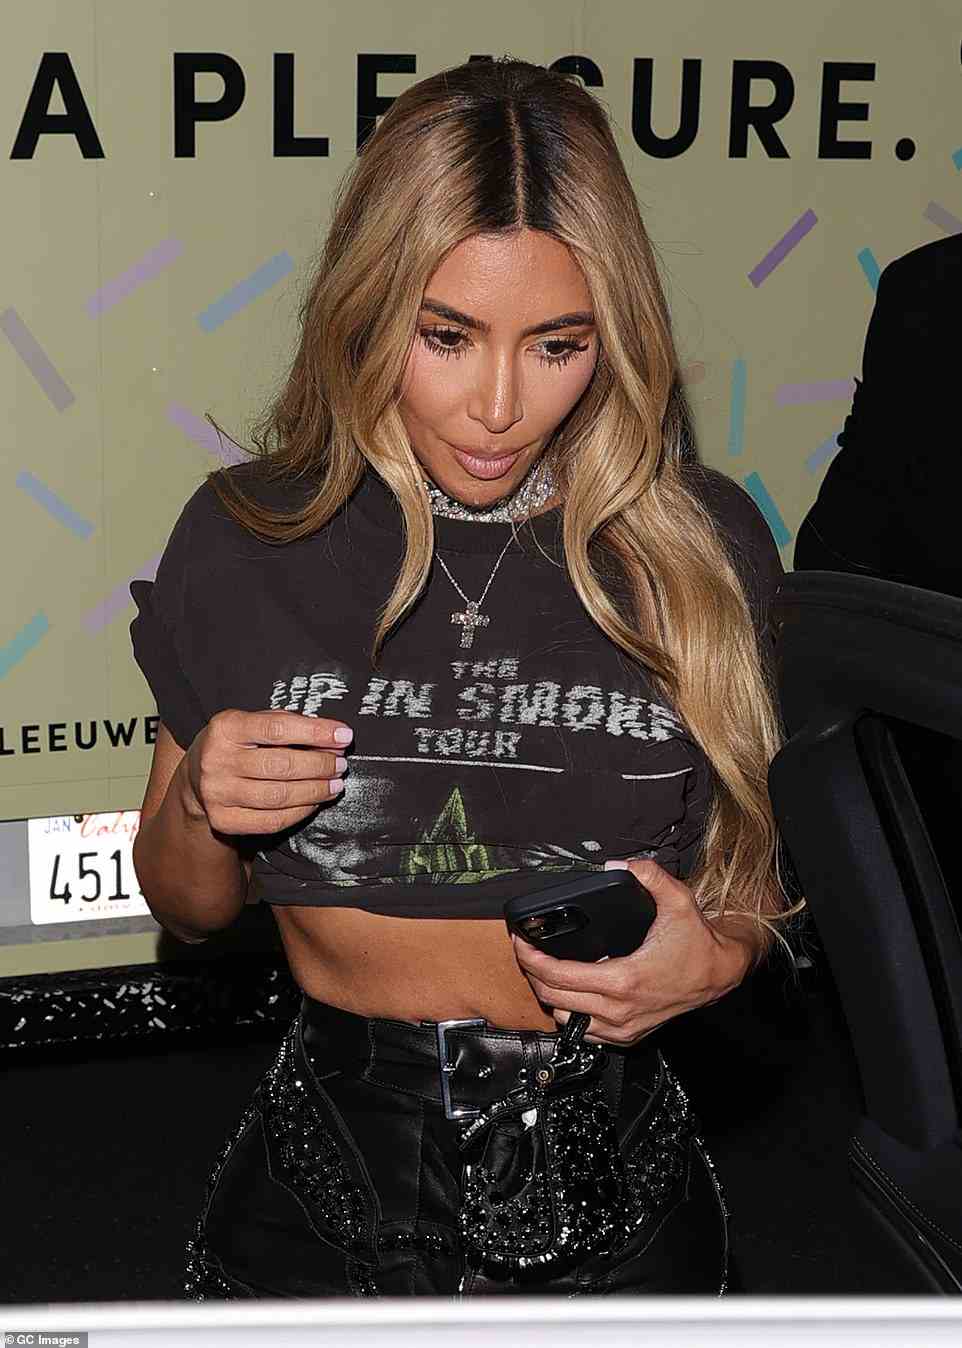 Hot: Kim Kardashian, 42, showed off her midriff in a tiny black top and high waisted leather pants as she arrived to the party. Her black hair was dyed a dirty blonde and fell in waves down the sides of her face